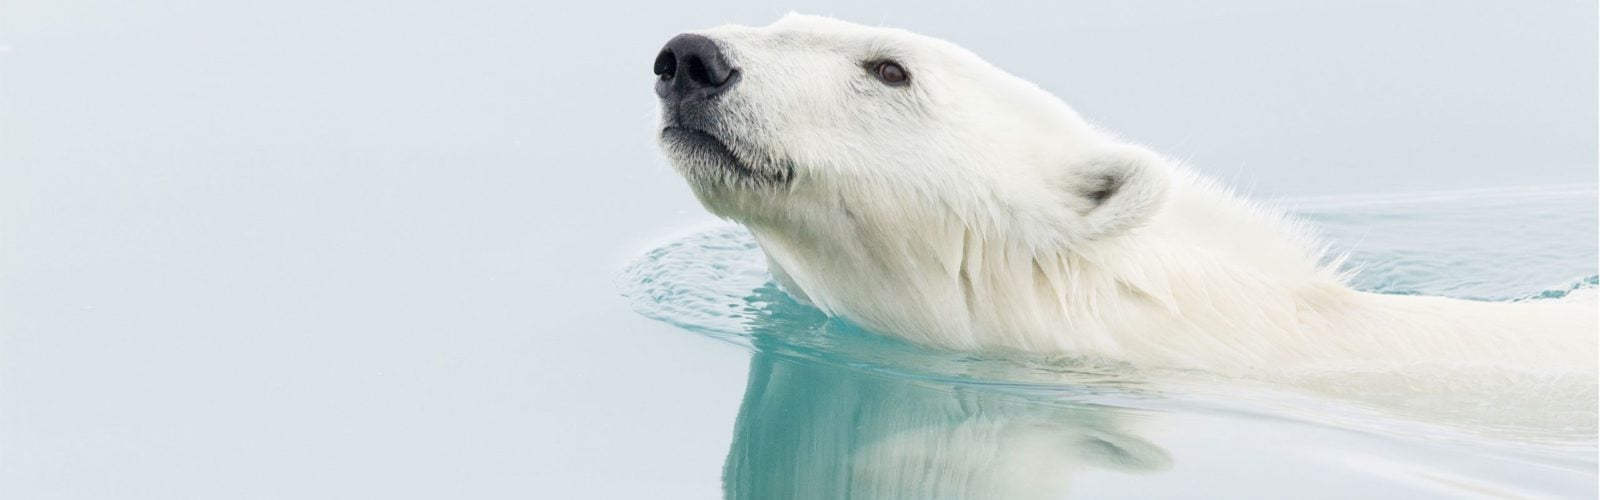 A polar bear glides through the icy waters in Svalbard